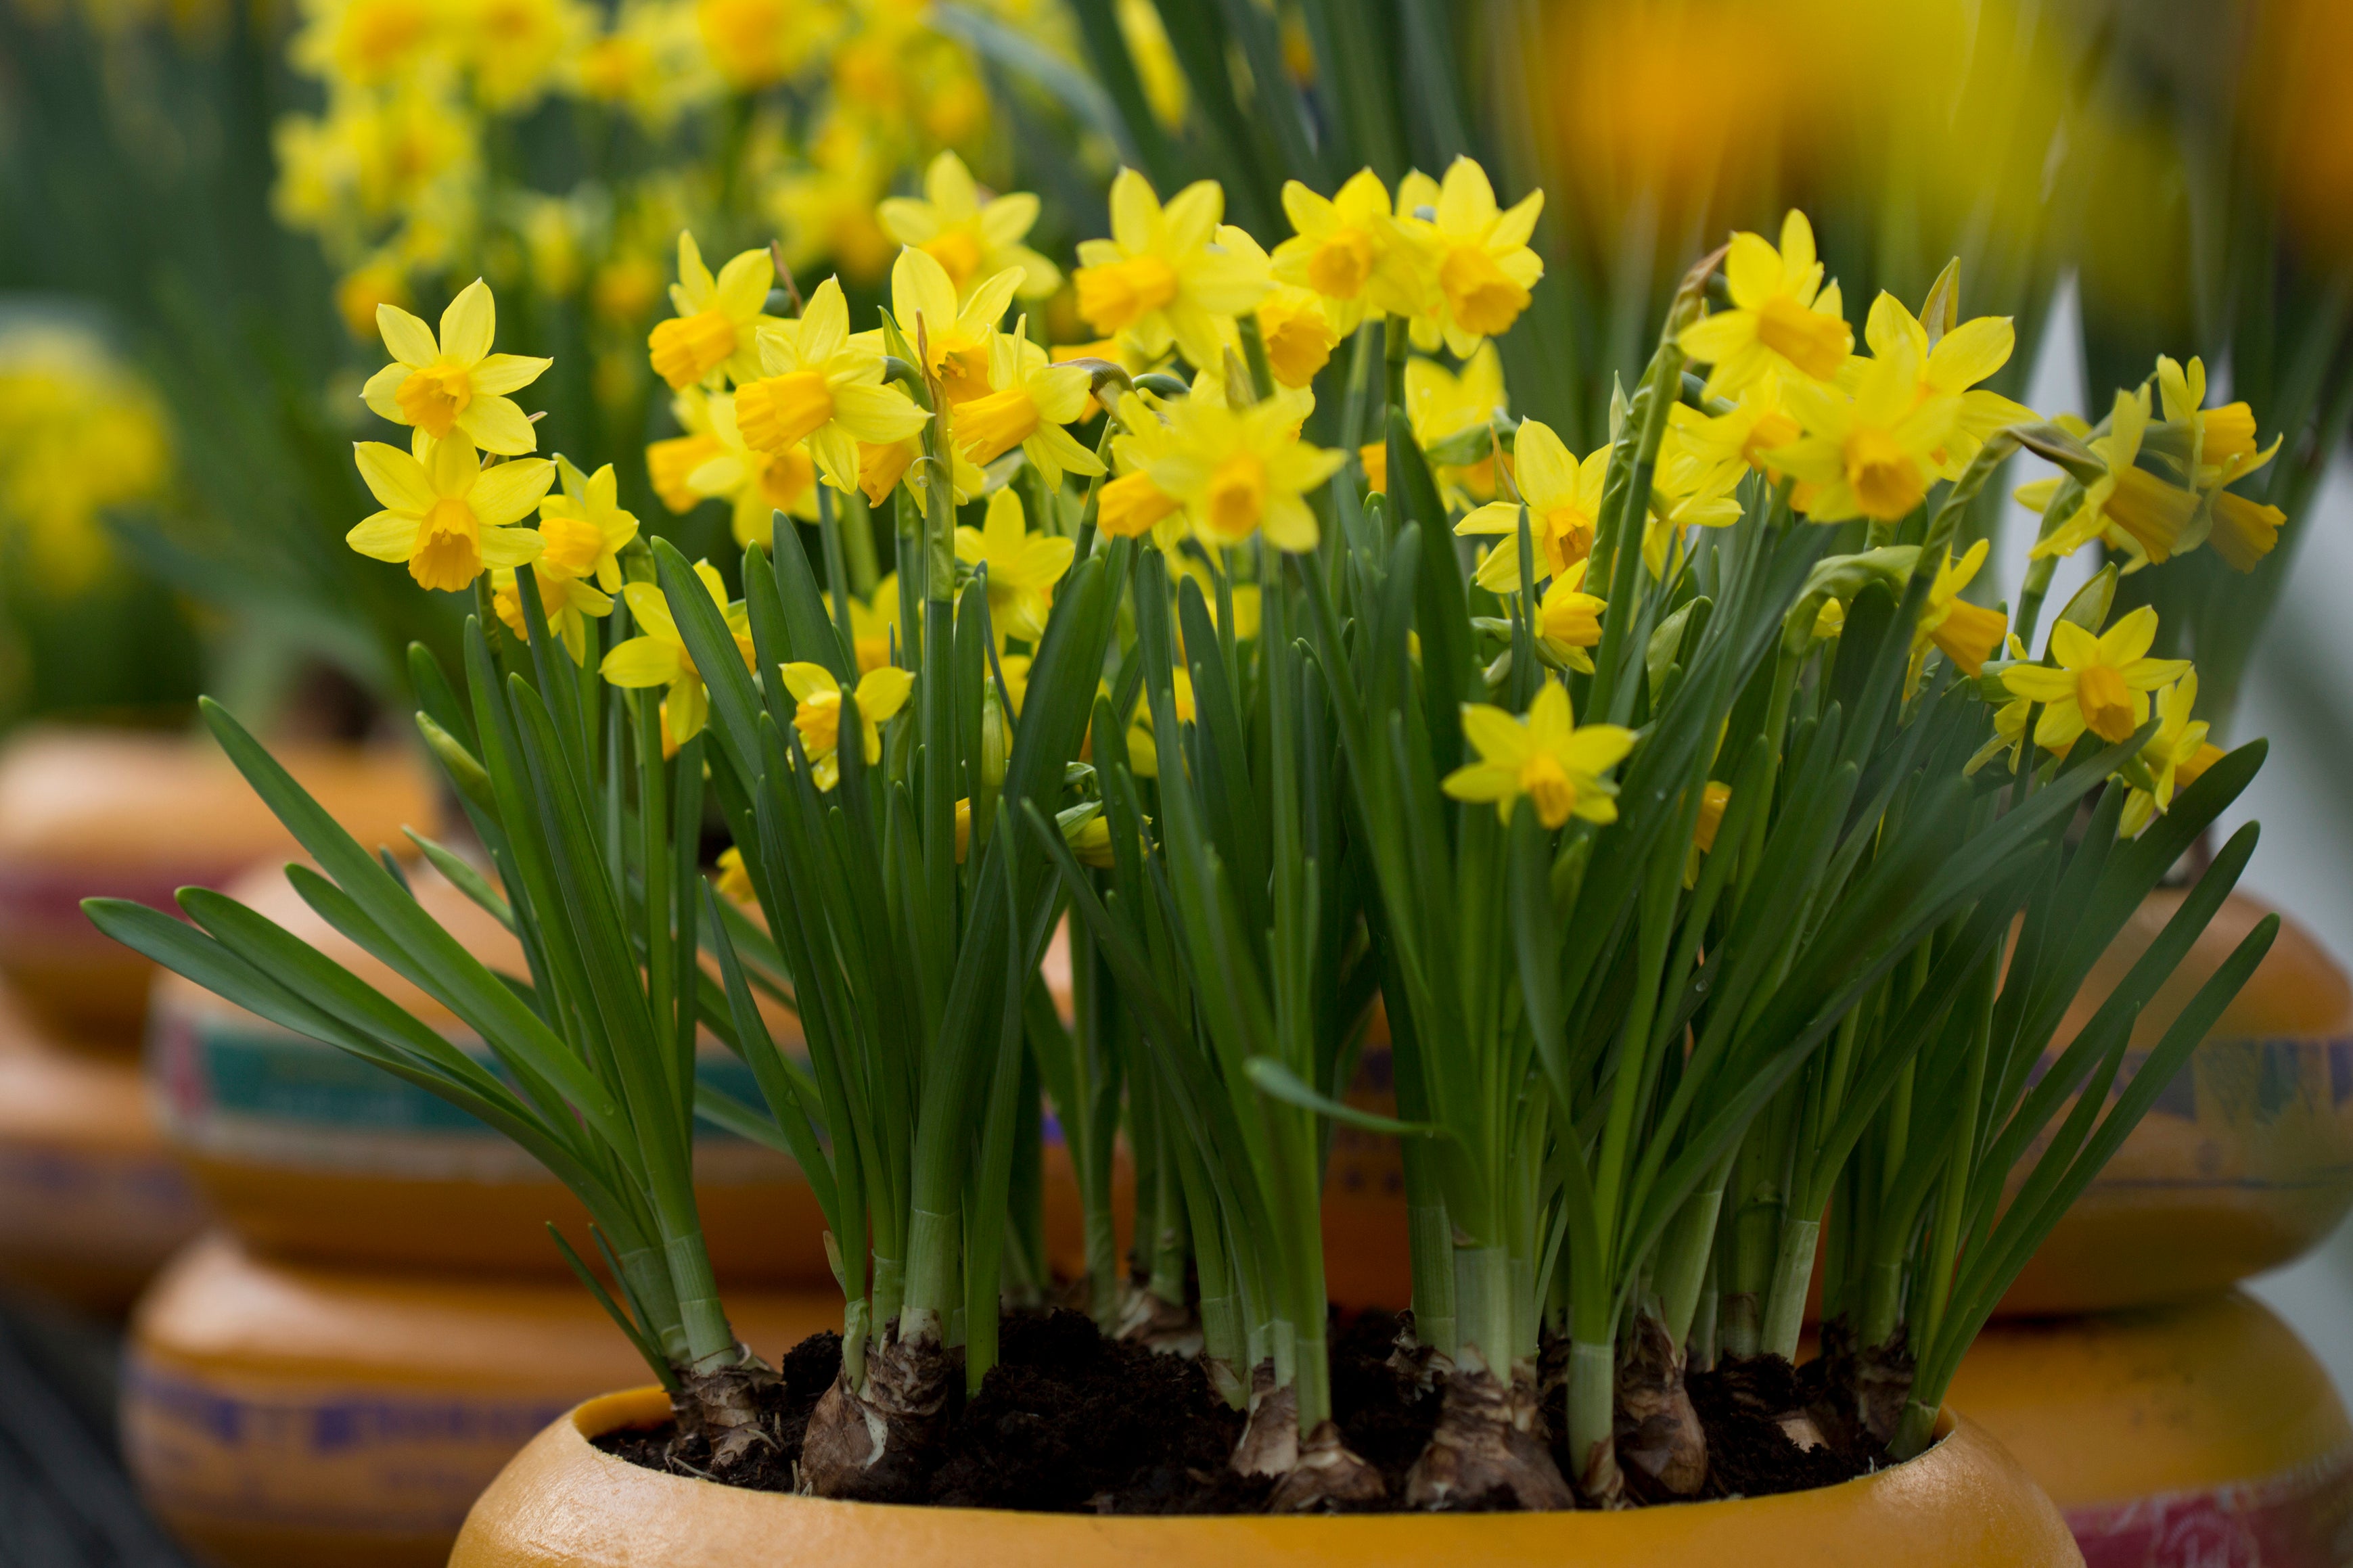 15 Great Types of Daffodils